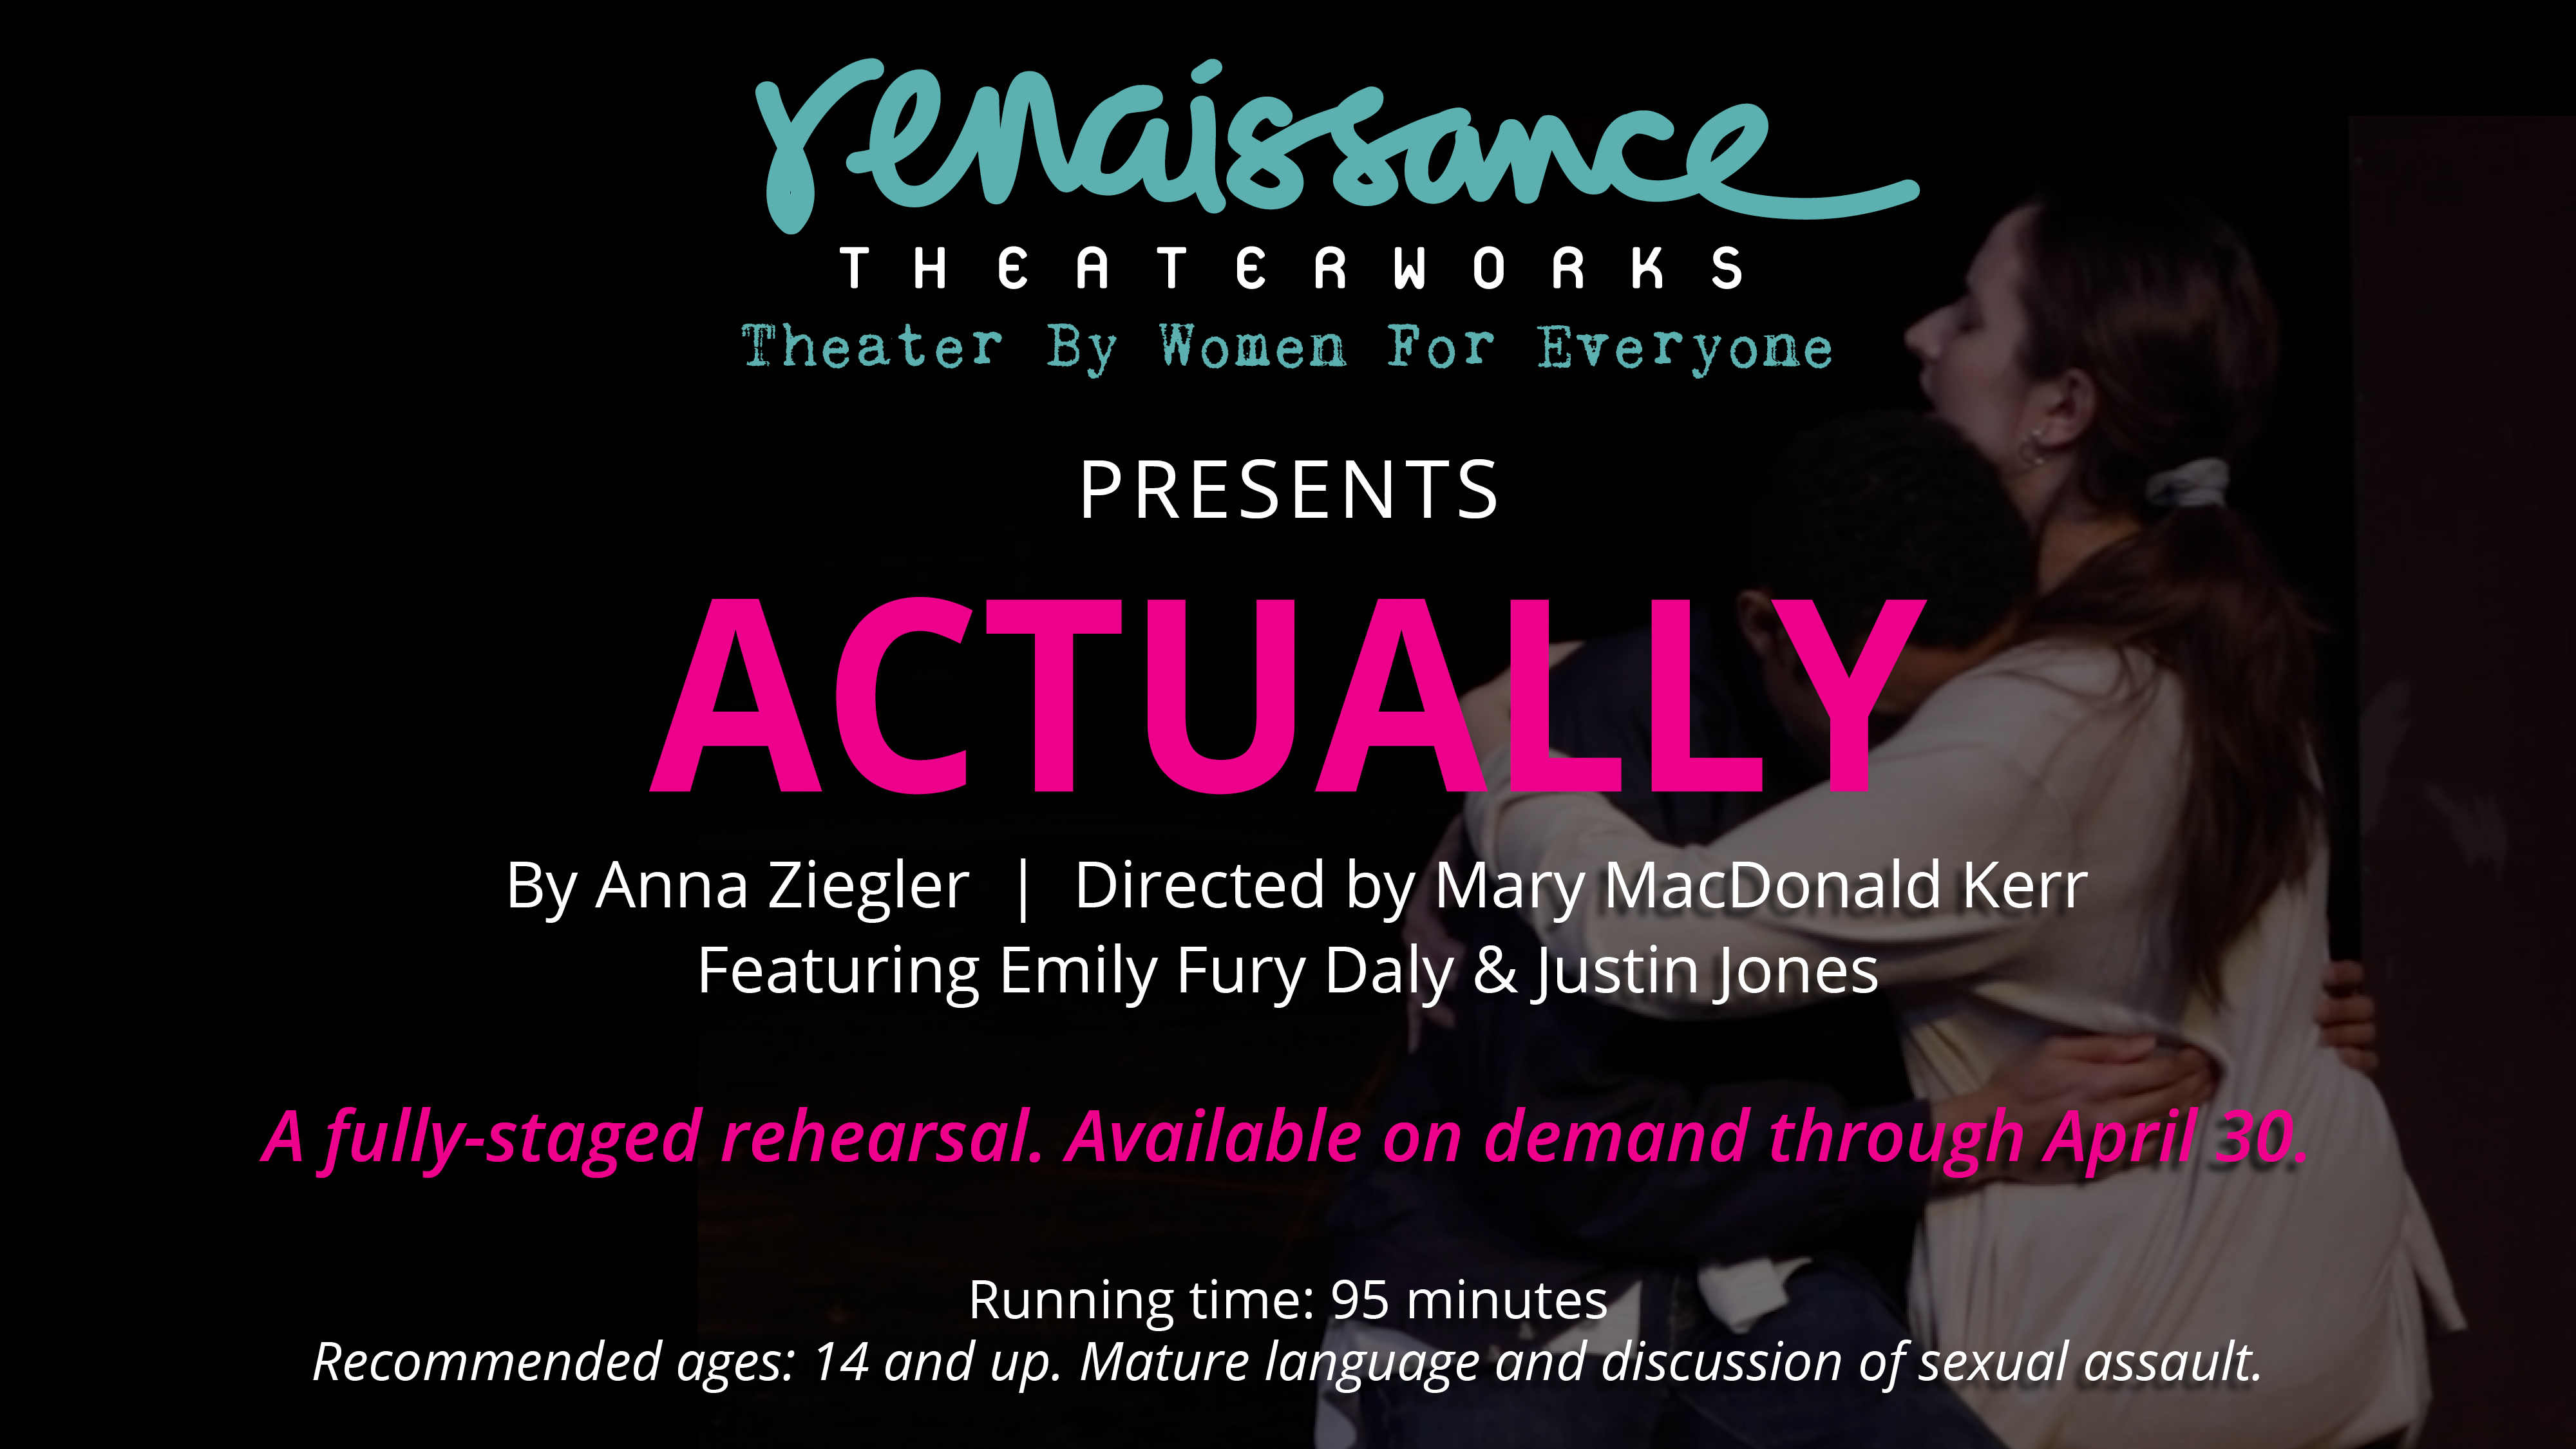 Video credits for ACTUALLY by Anna Ziegler a 2019-20 Renaissance Theaterworks' production